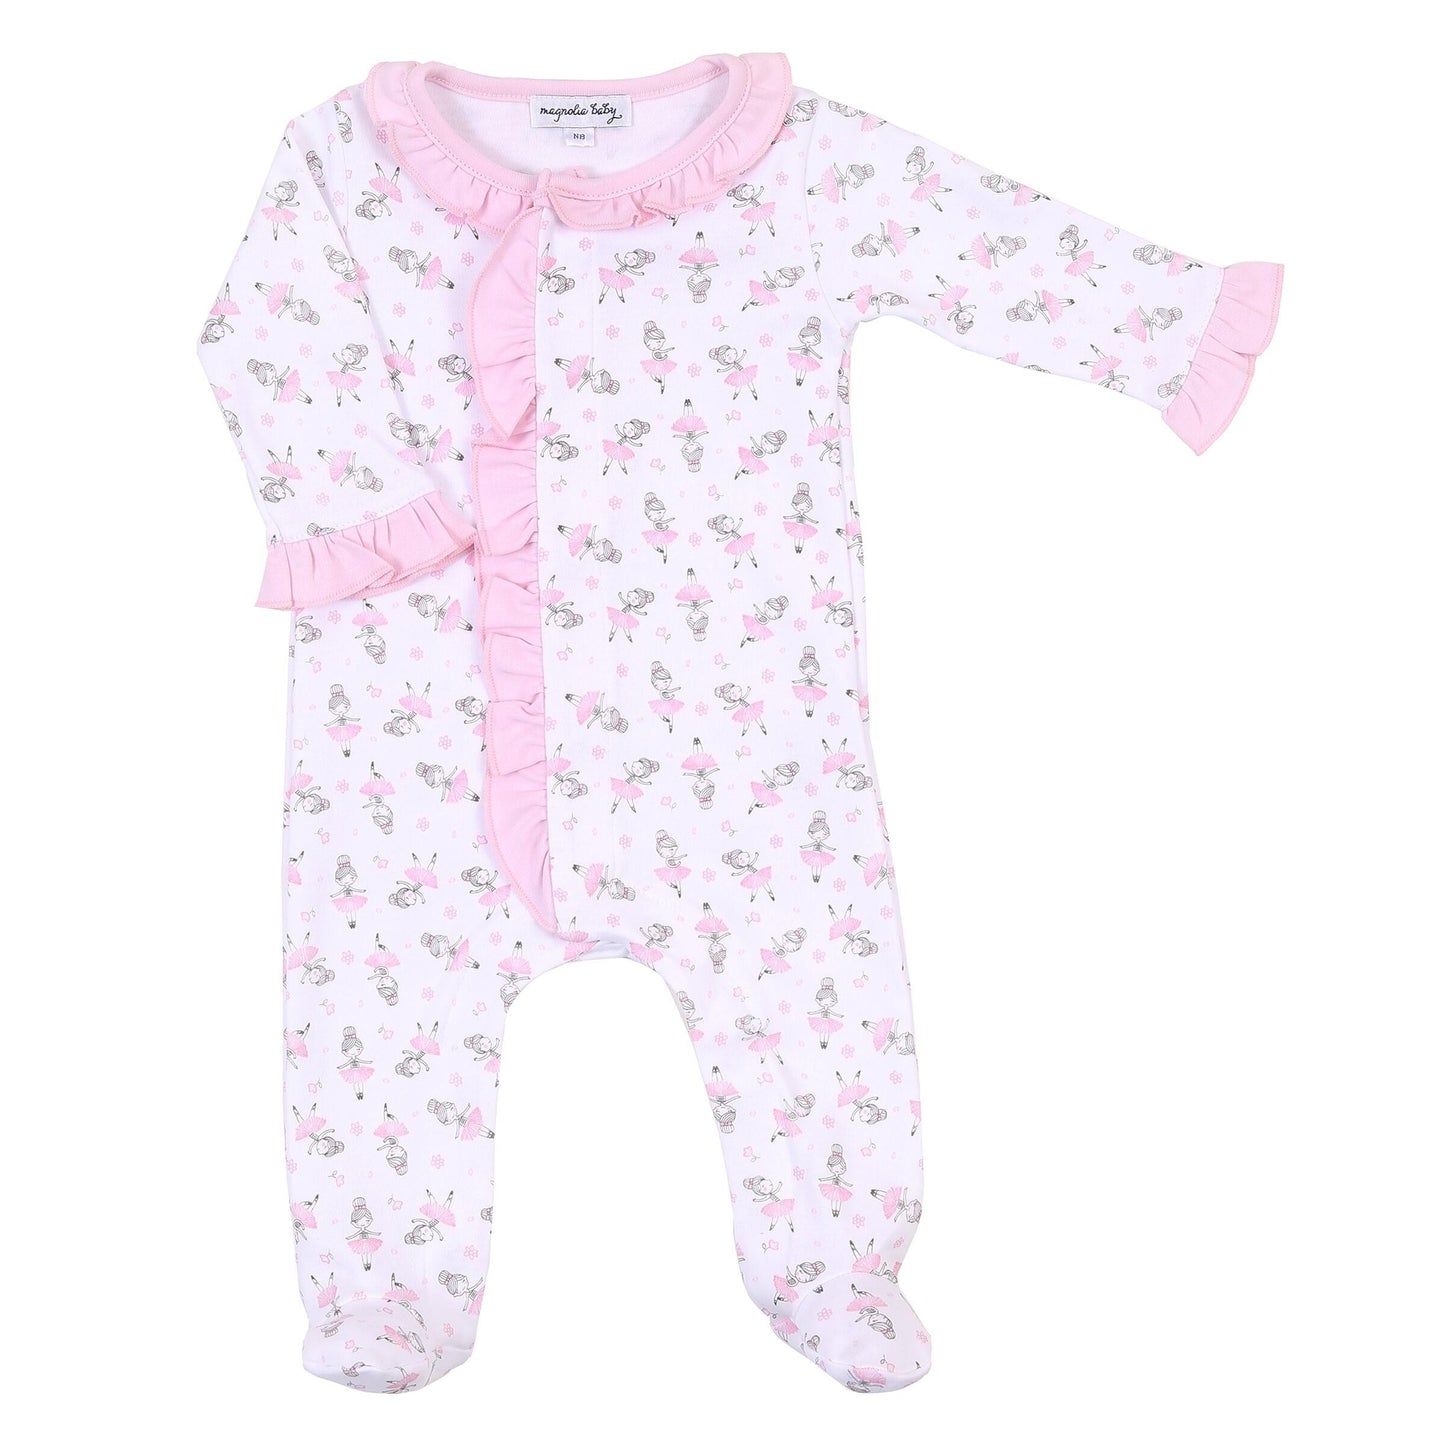 Prima Ballerina Pink Printed Ruffle Front Footie and Hat Set